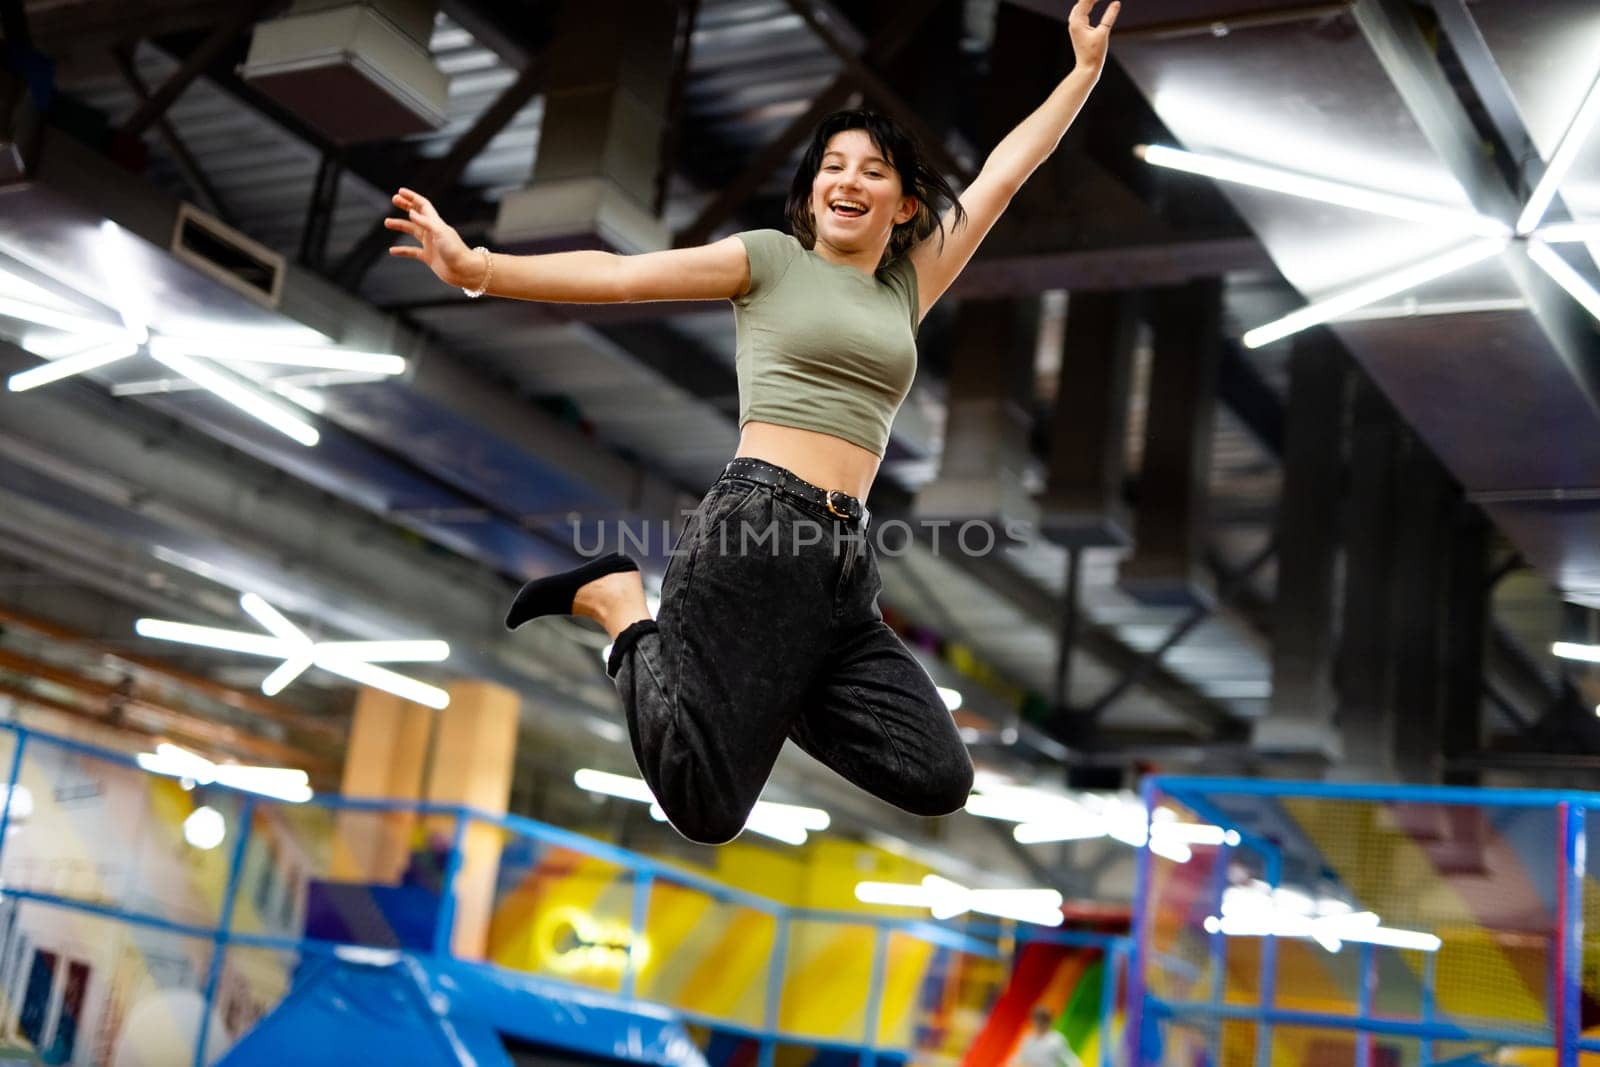 Pretty girl jumping on colorful trampoline at playground park and smiling. Beautiful female teenager happy during active entertaiments indoor